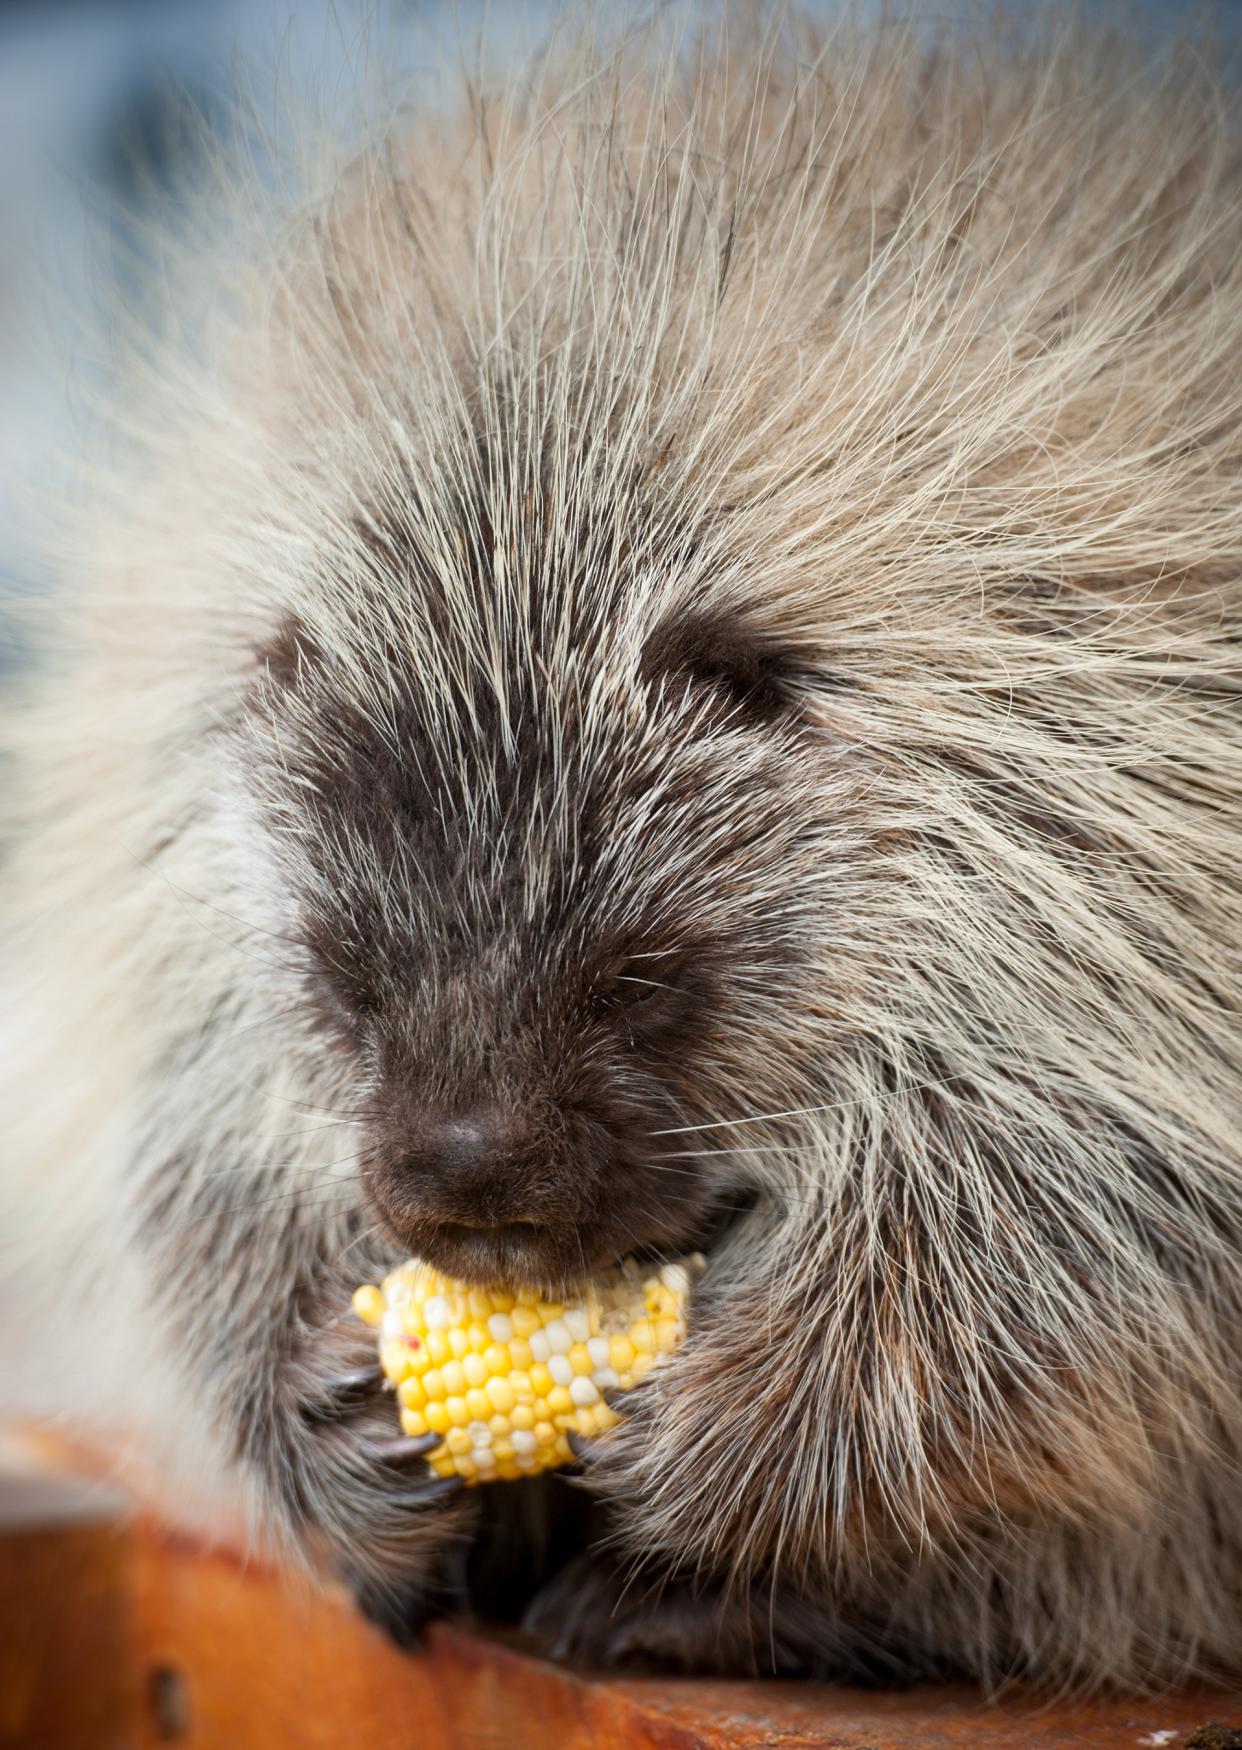 https://www.gettyimages.co.uk/detail/news-photo/porcupine-eating-corn-news-photo/687636266